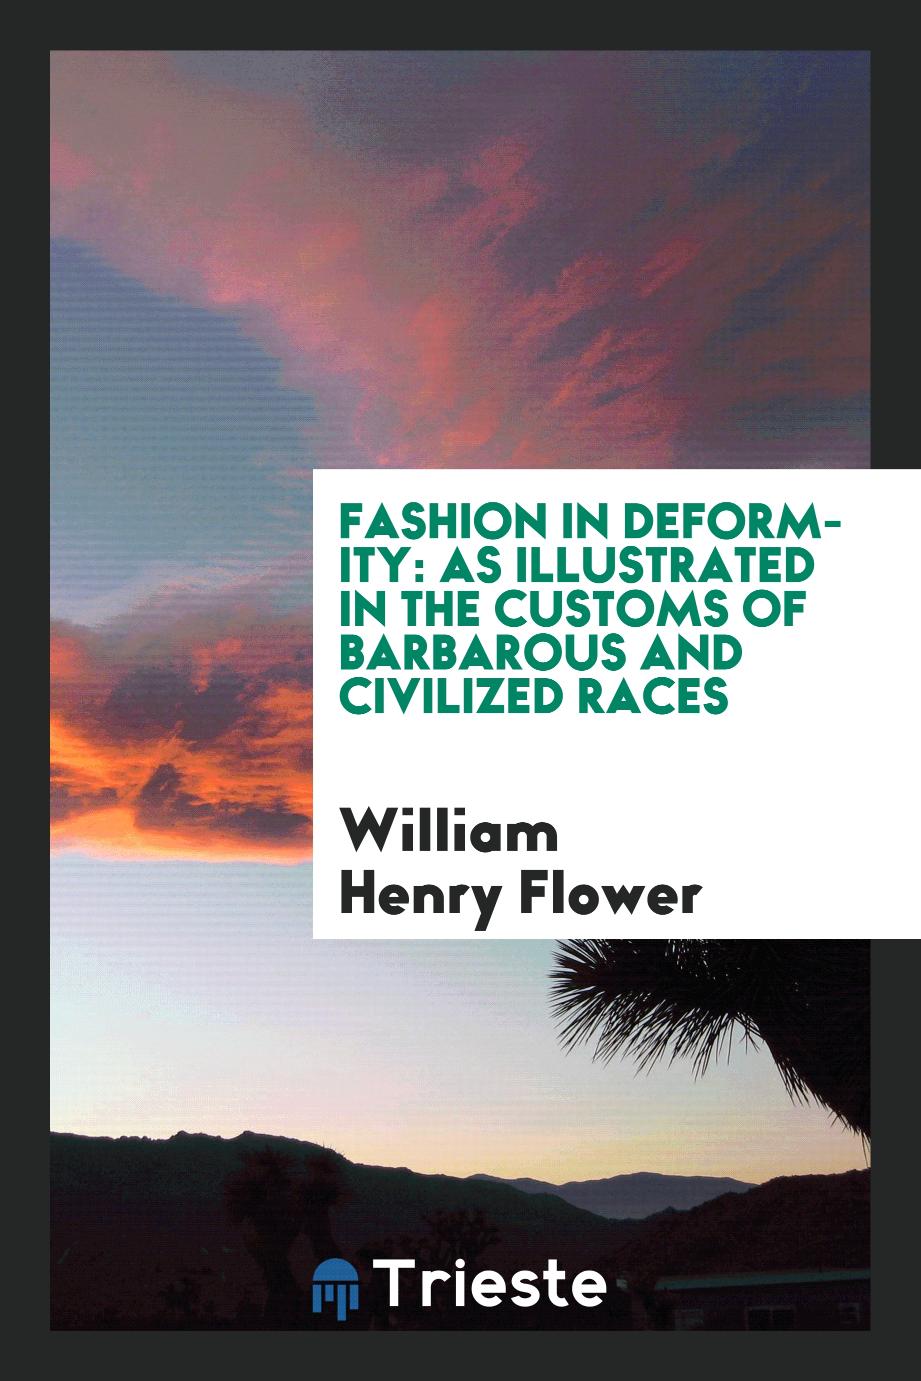 Fashion in deformity: as illustrated in the customs of barbarous and civilized races